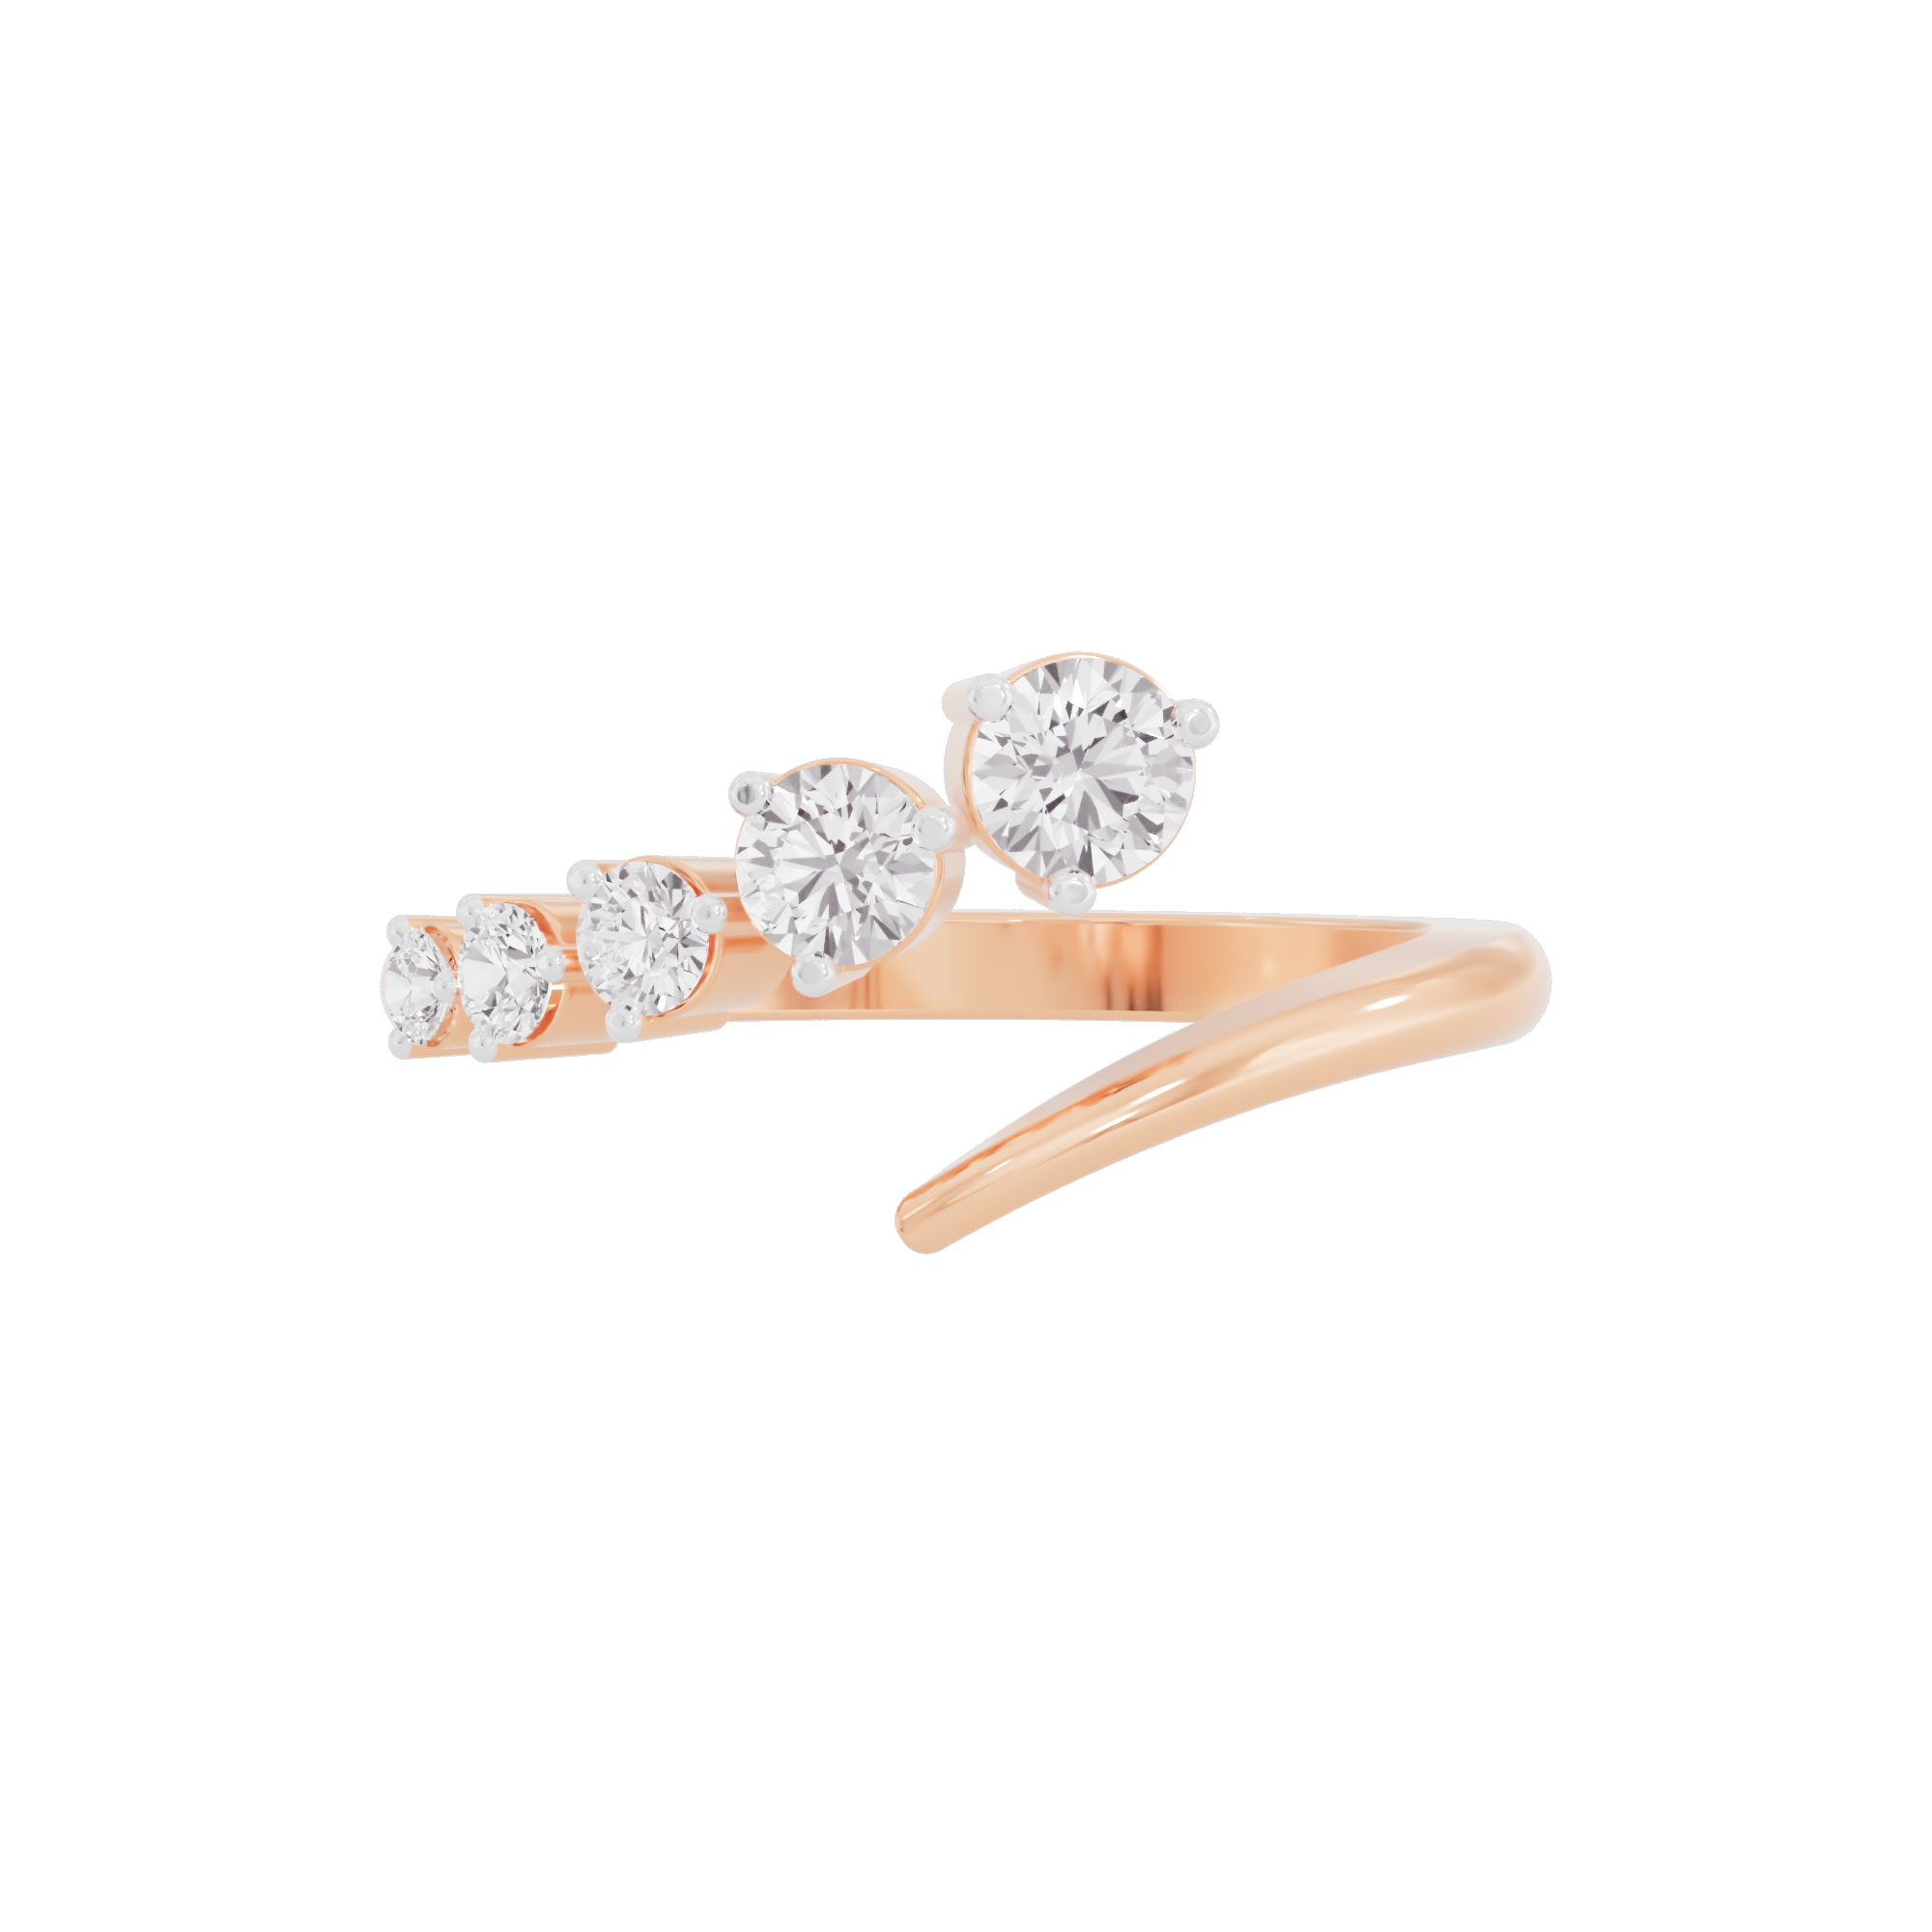 Ethereal Embrace Diamond Ring